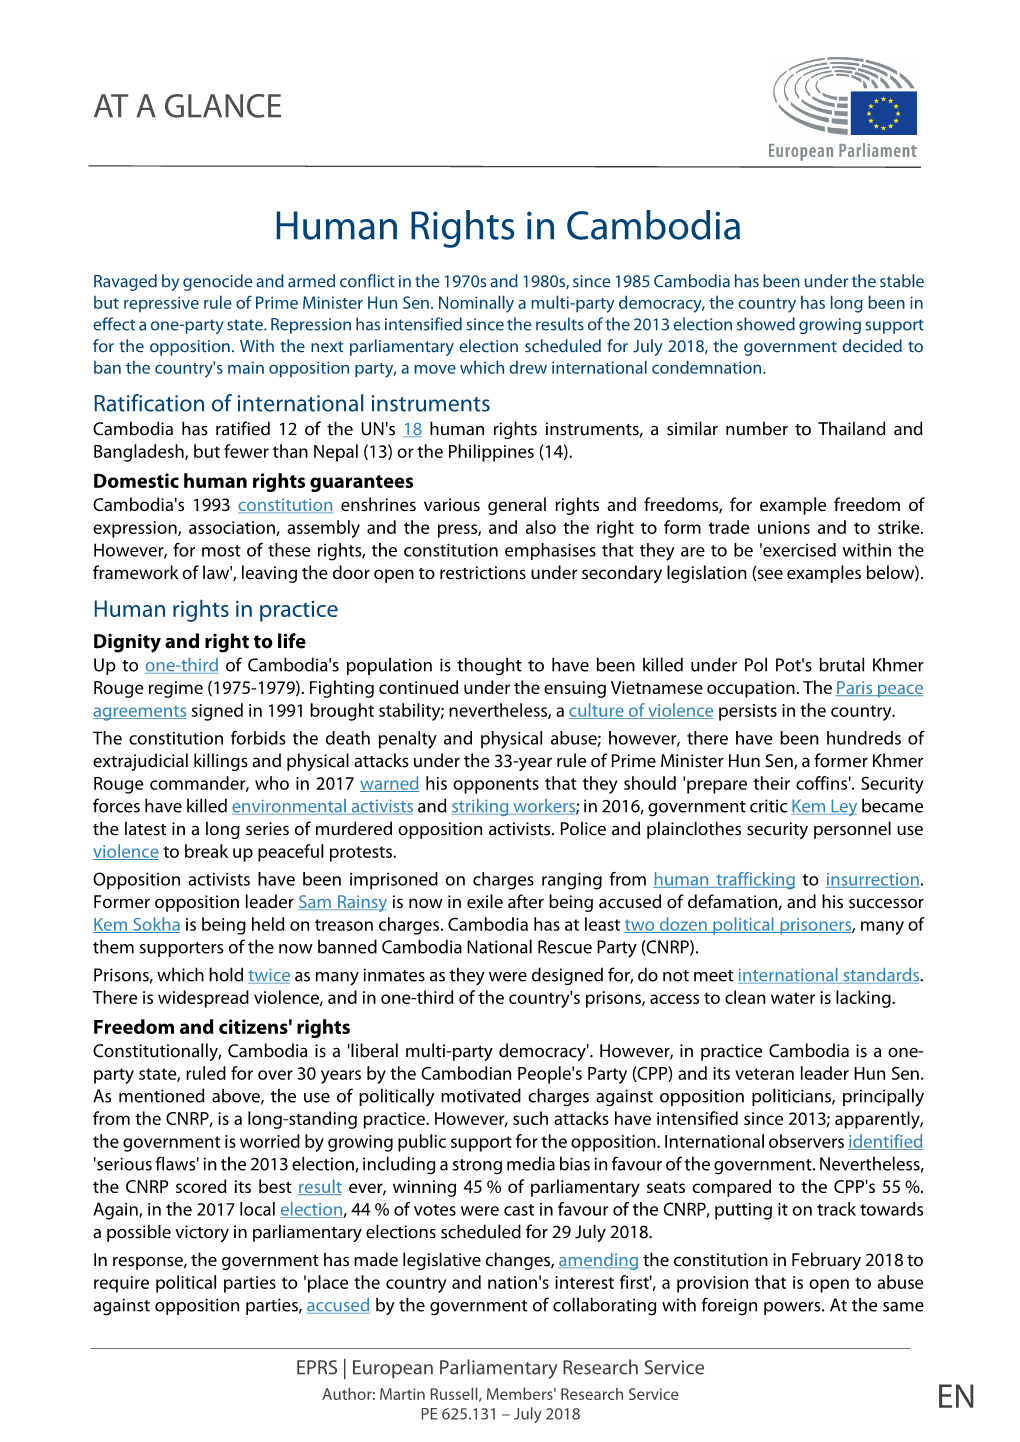 Human Rights in Cambodia